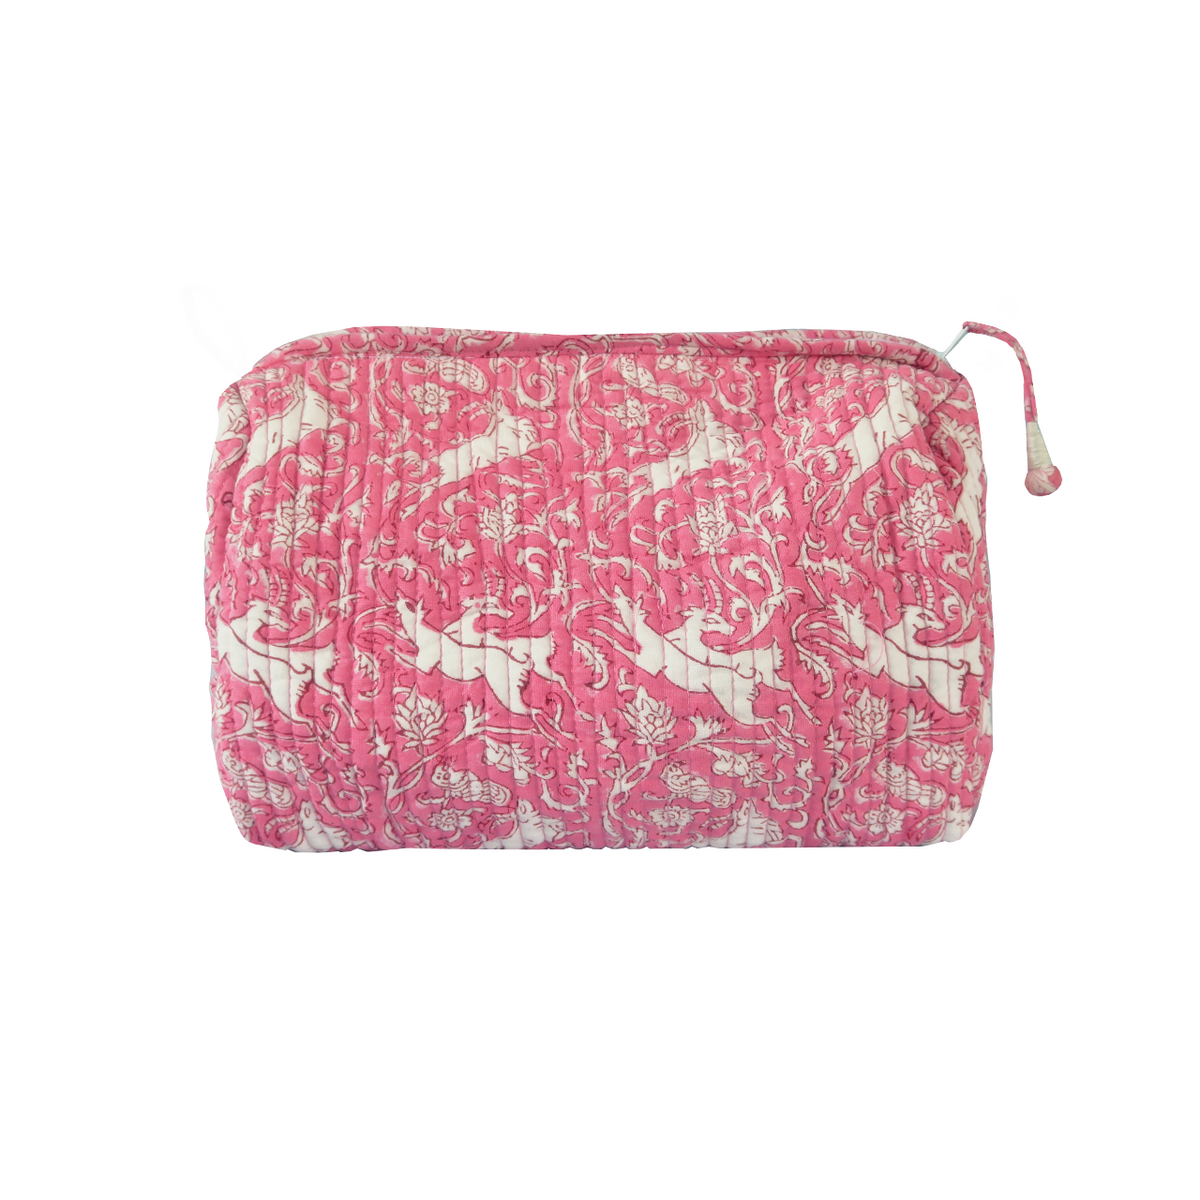 Quilted Toiletry Bag Pink The Pdkf Store 4517